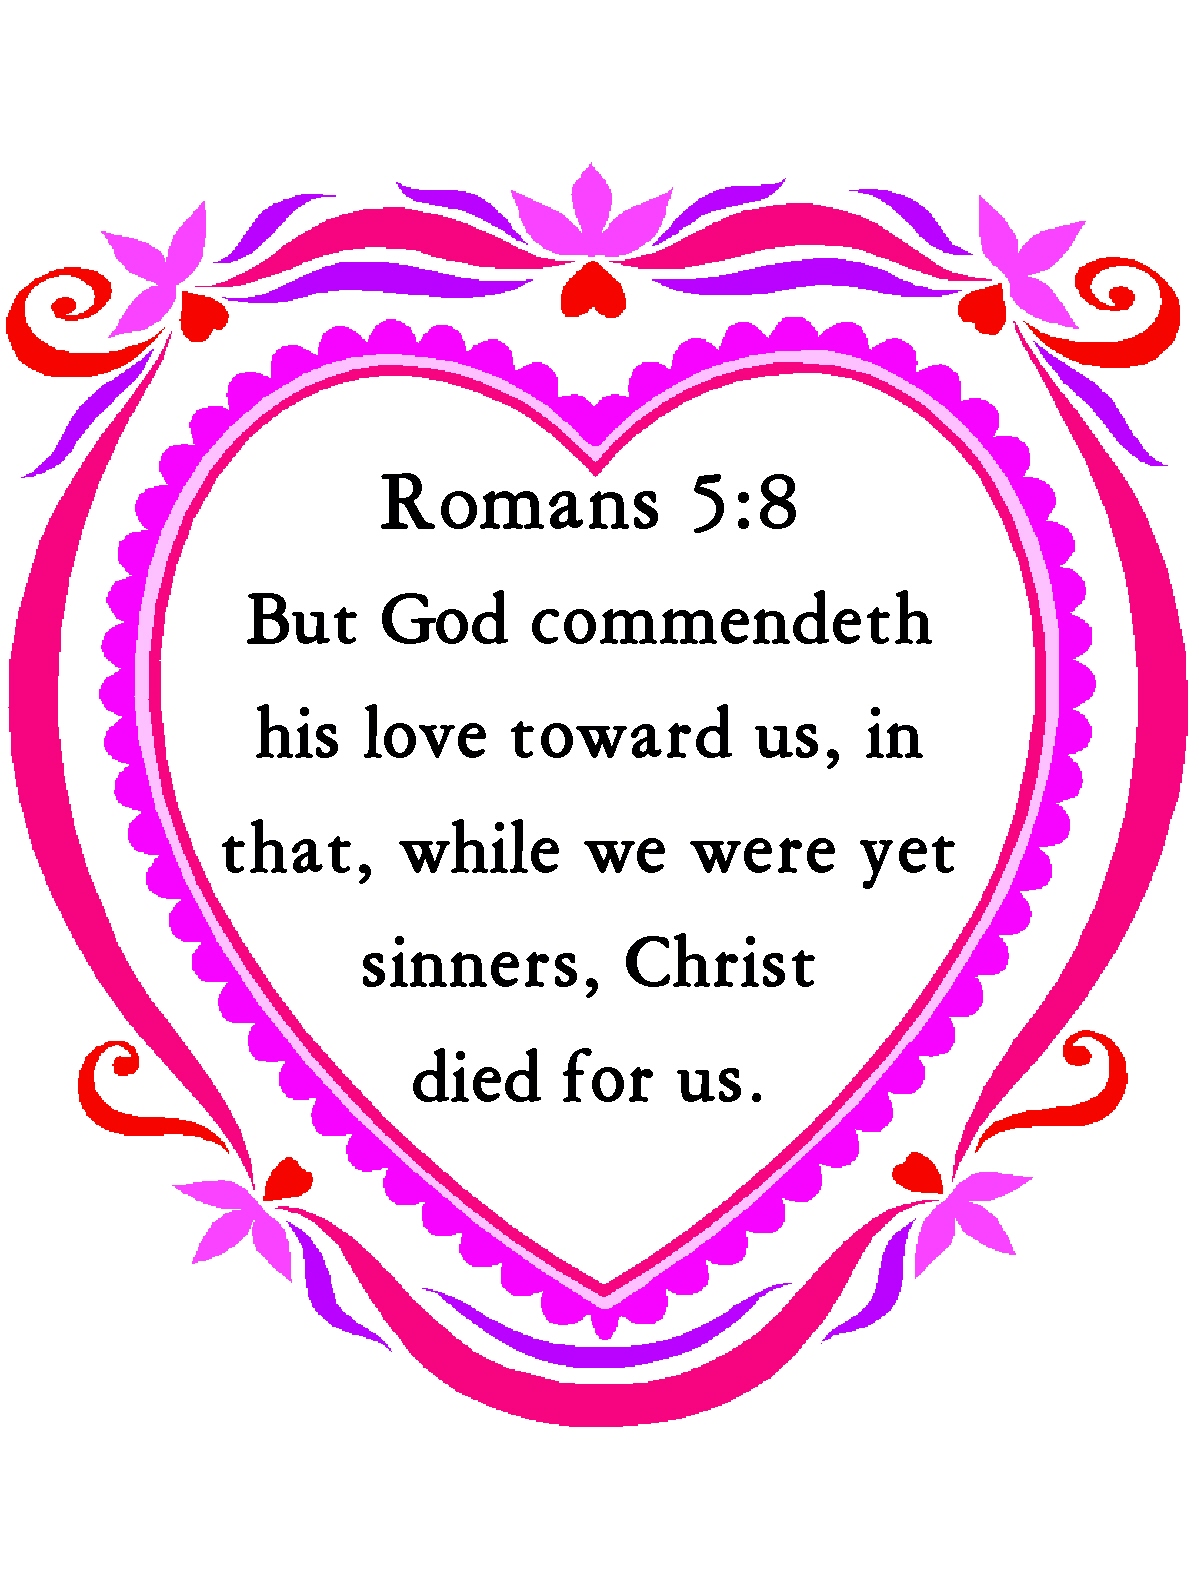 Christian Images In My Treasure Box: Romans 5:8 - Valentine Heart Stuff updated ...1199 x 1574